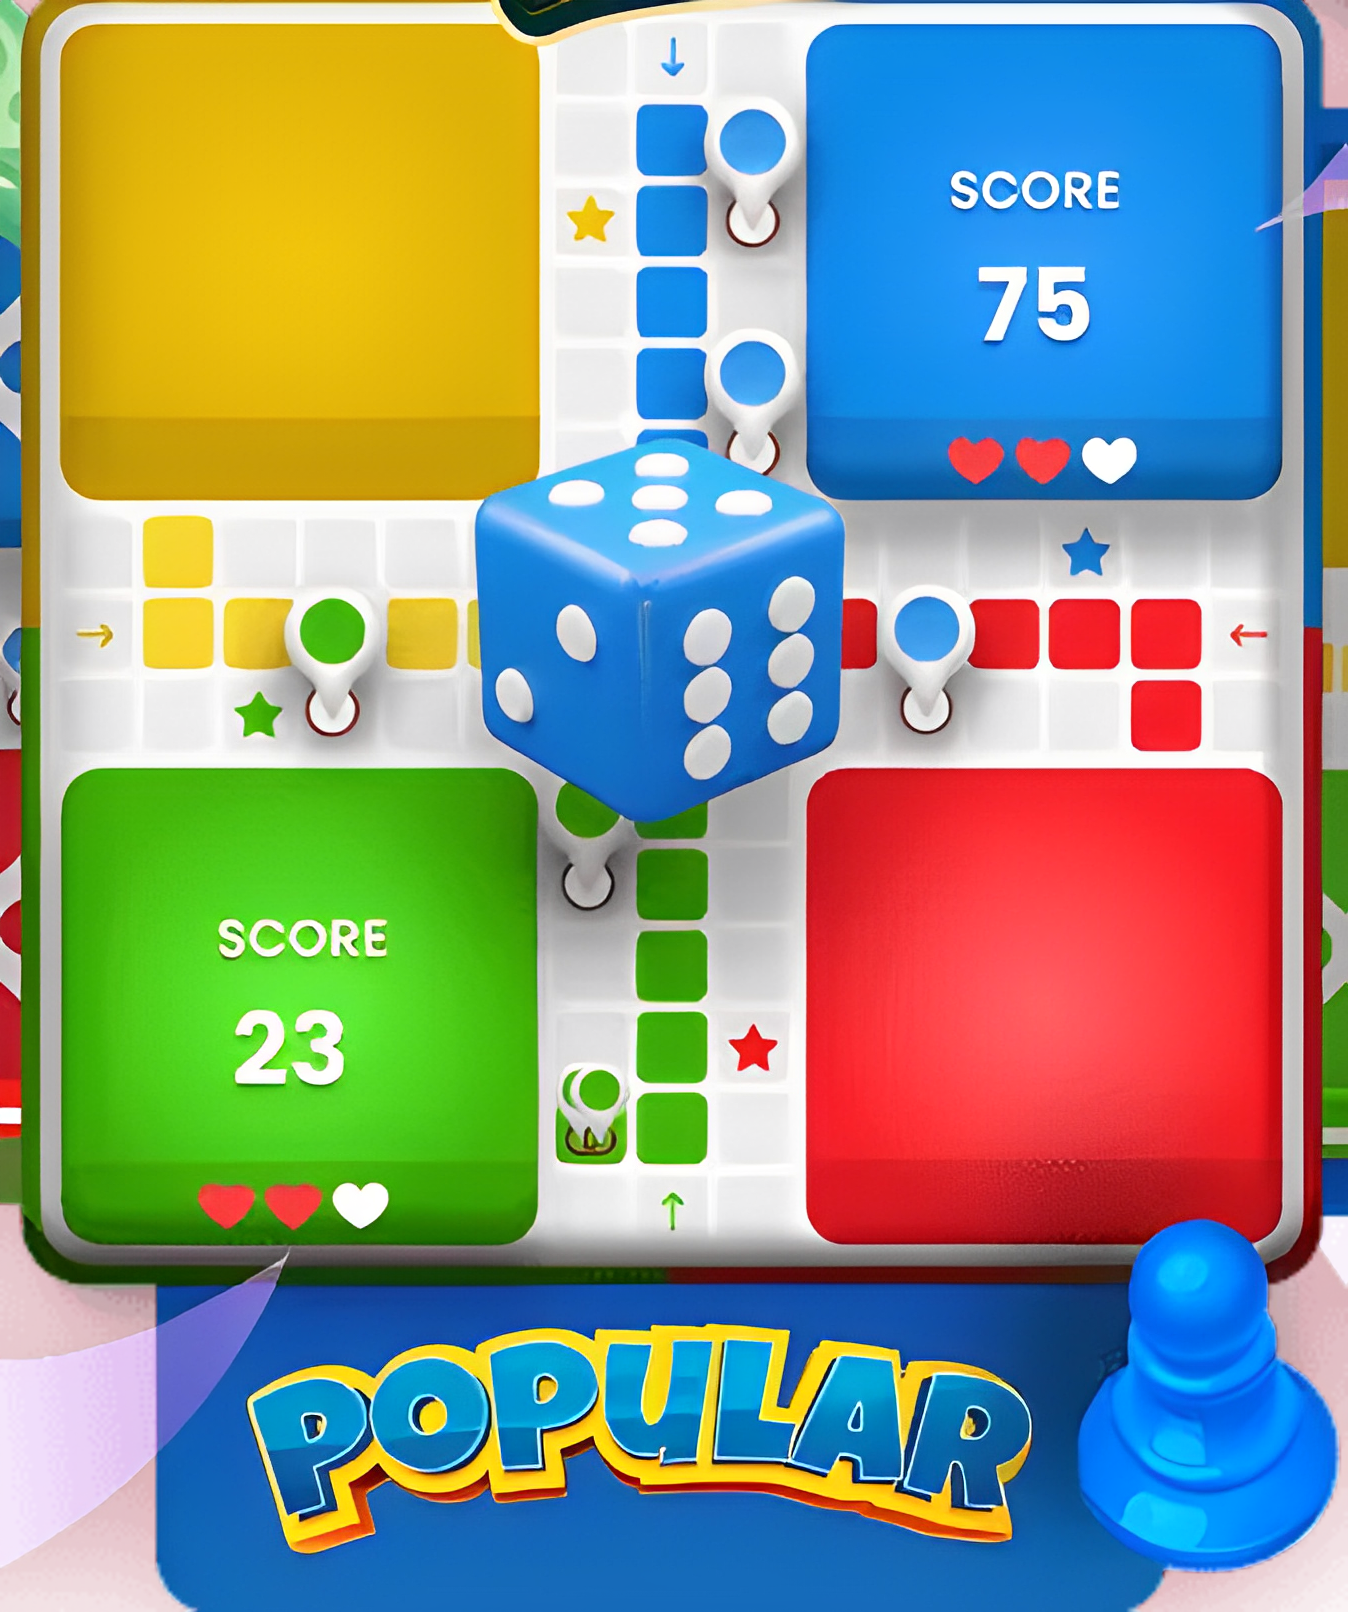 Online ludo game earn money. Online gaming has become a popular